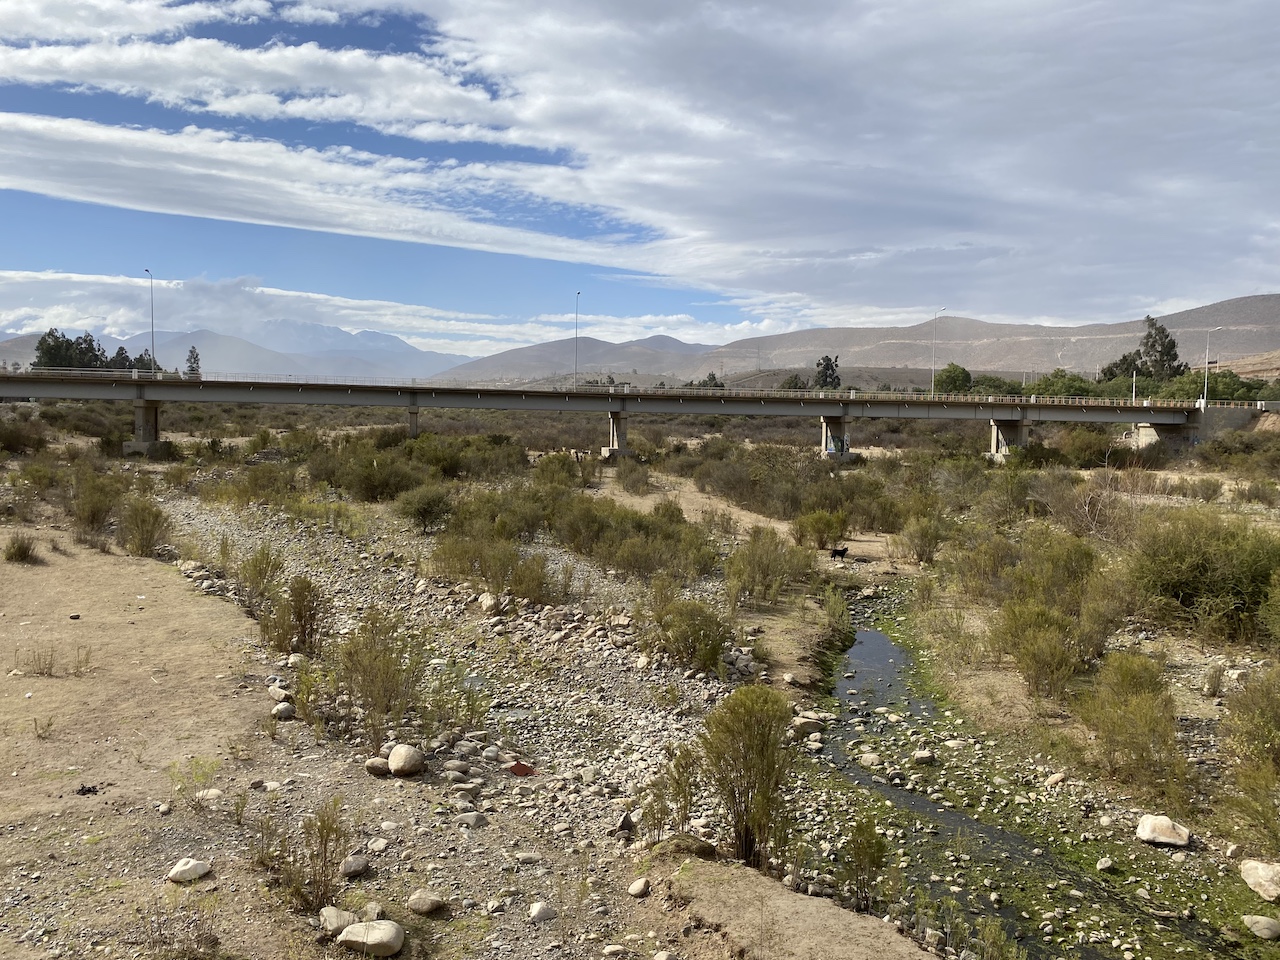 dry flow of the Illapel River in Chile